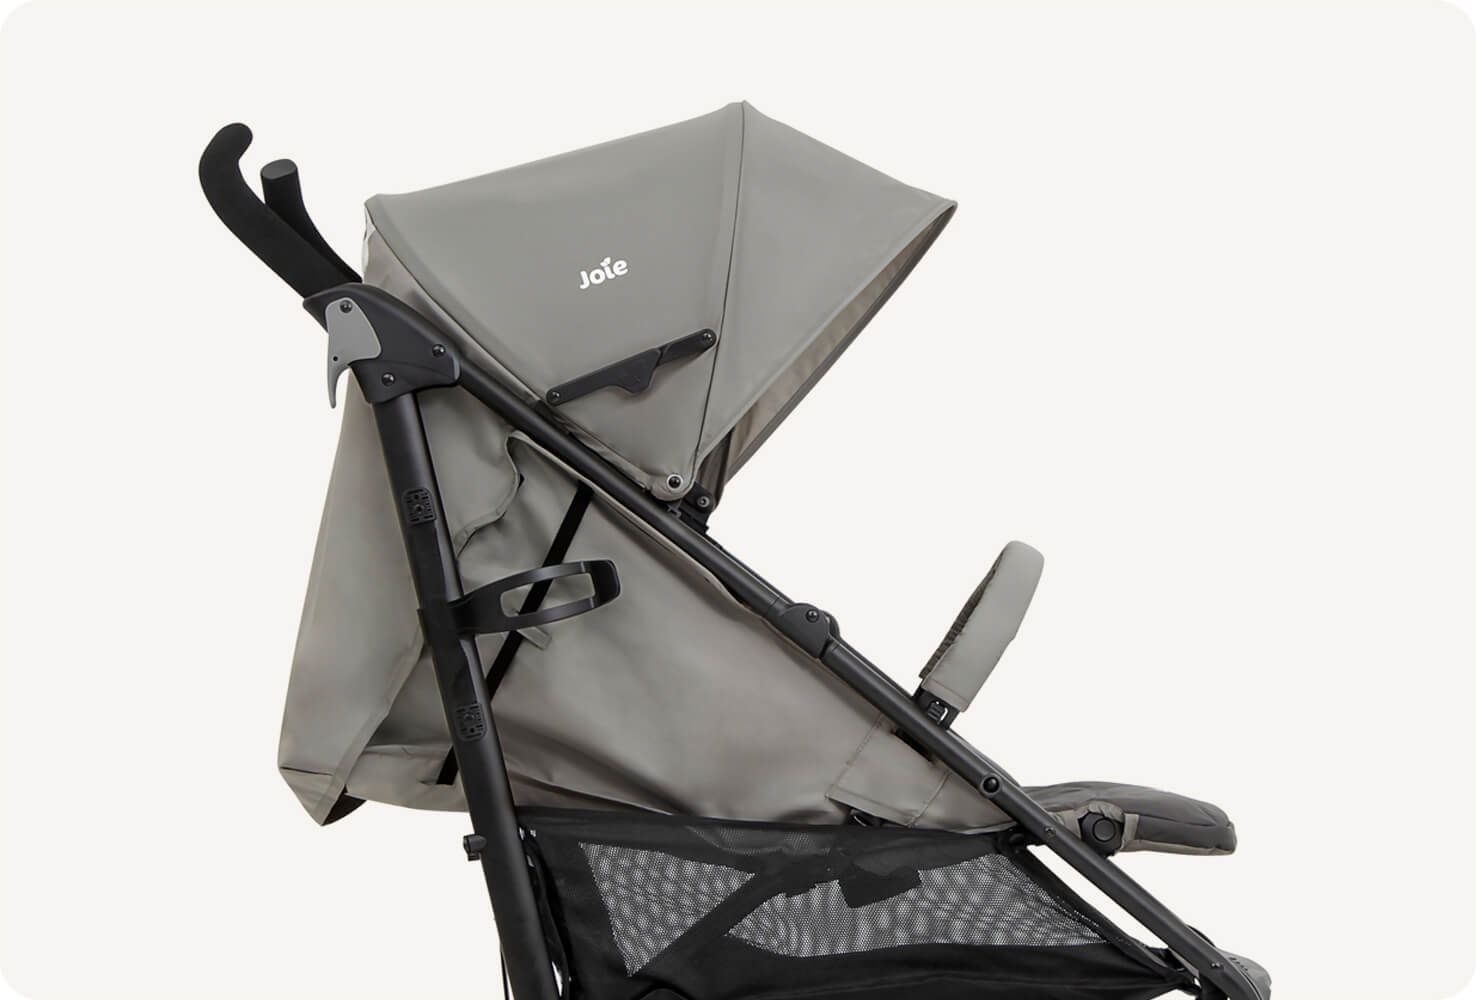   A closeup of the Joie Brisk LX stroller in two tone gray, in profile facing to the right with the seat fully reclined.